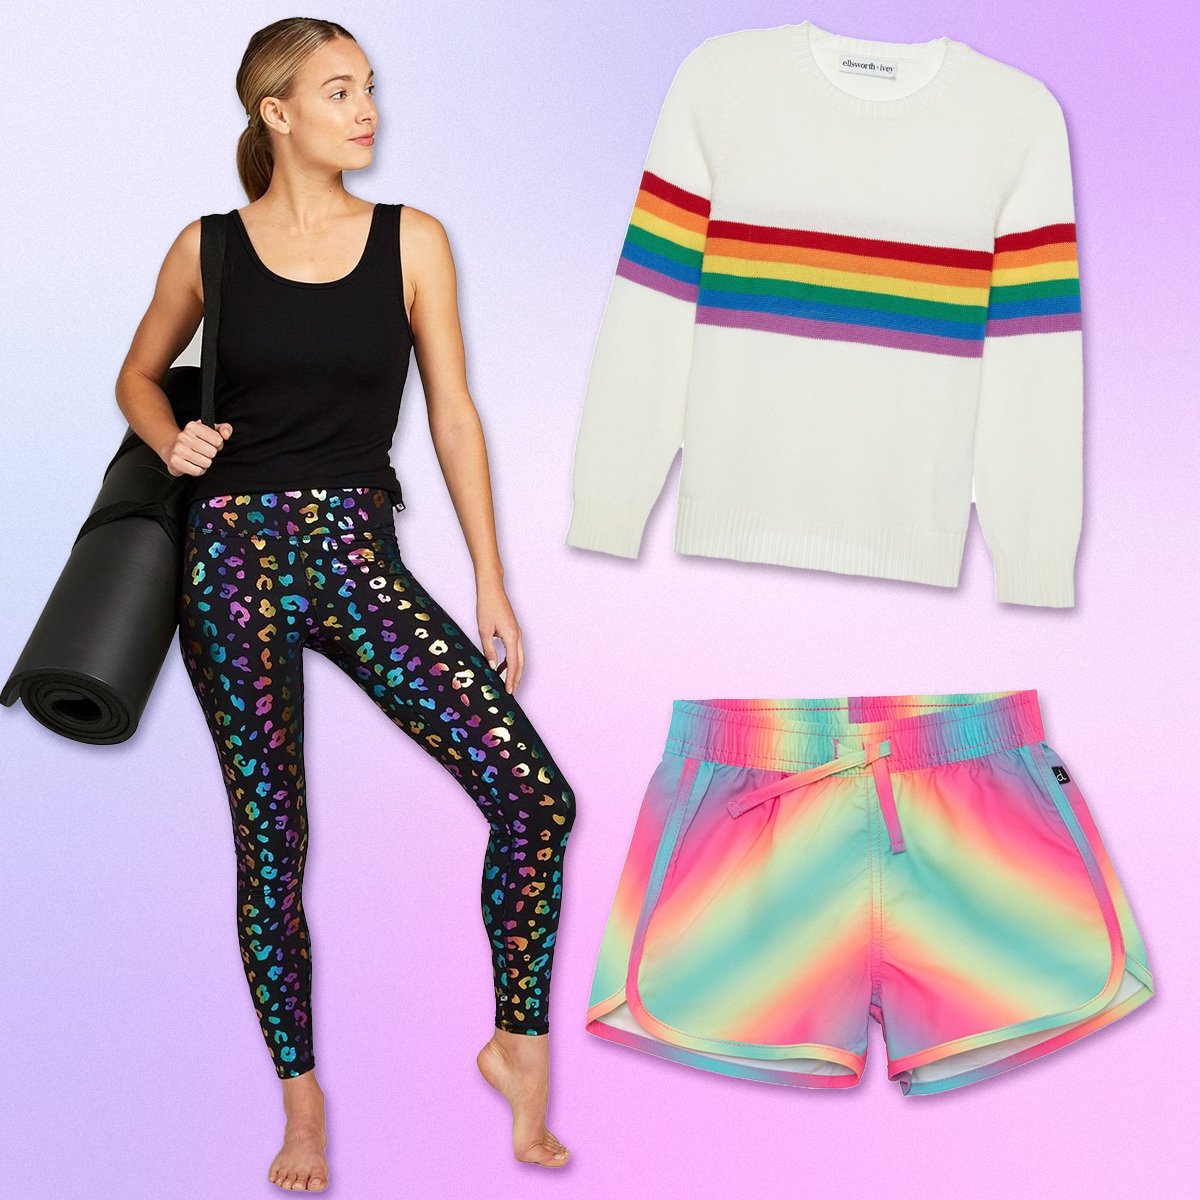 Shop 6 Unexpected Ways To Show Your Pride With Style